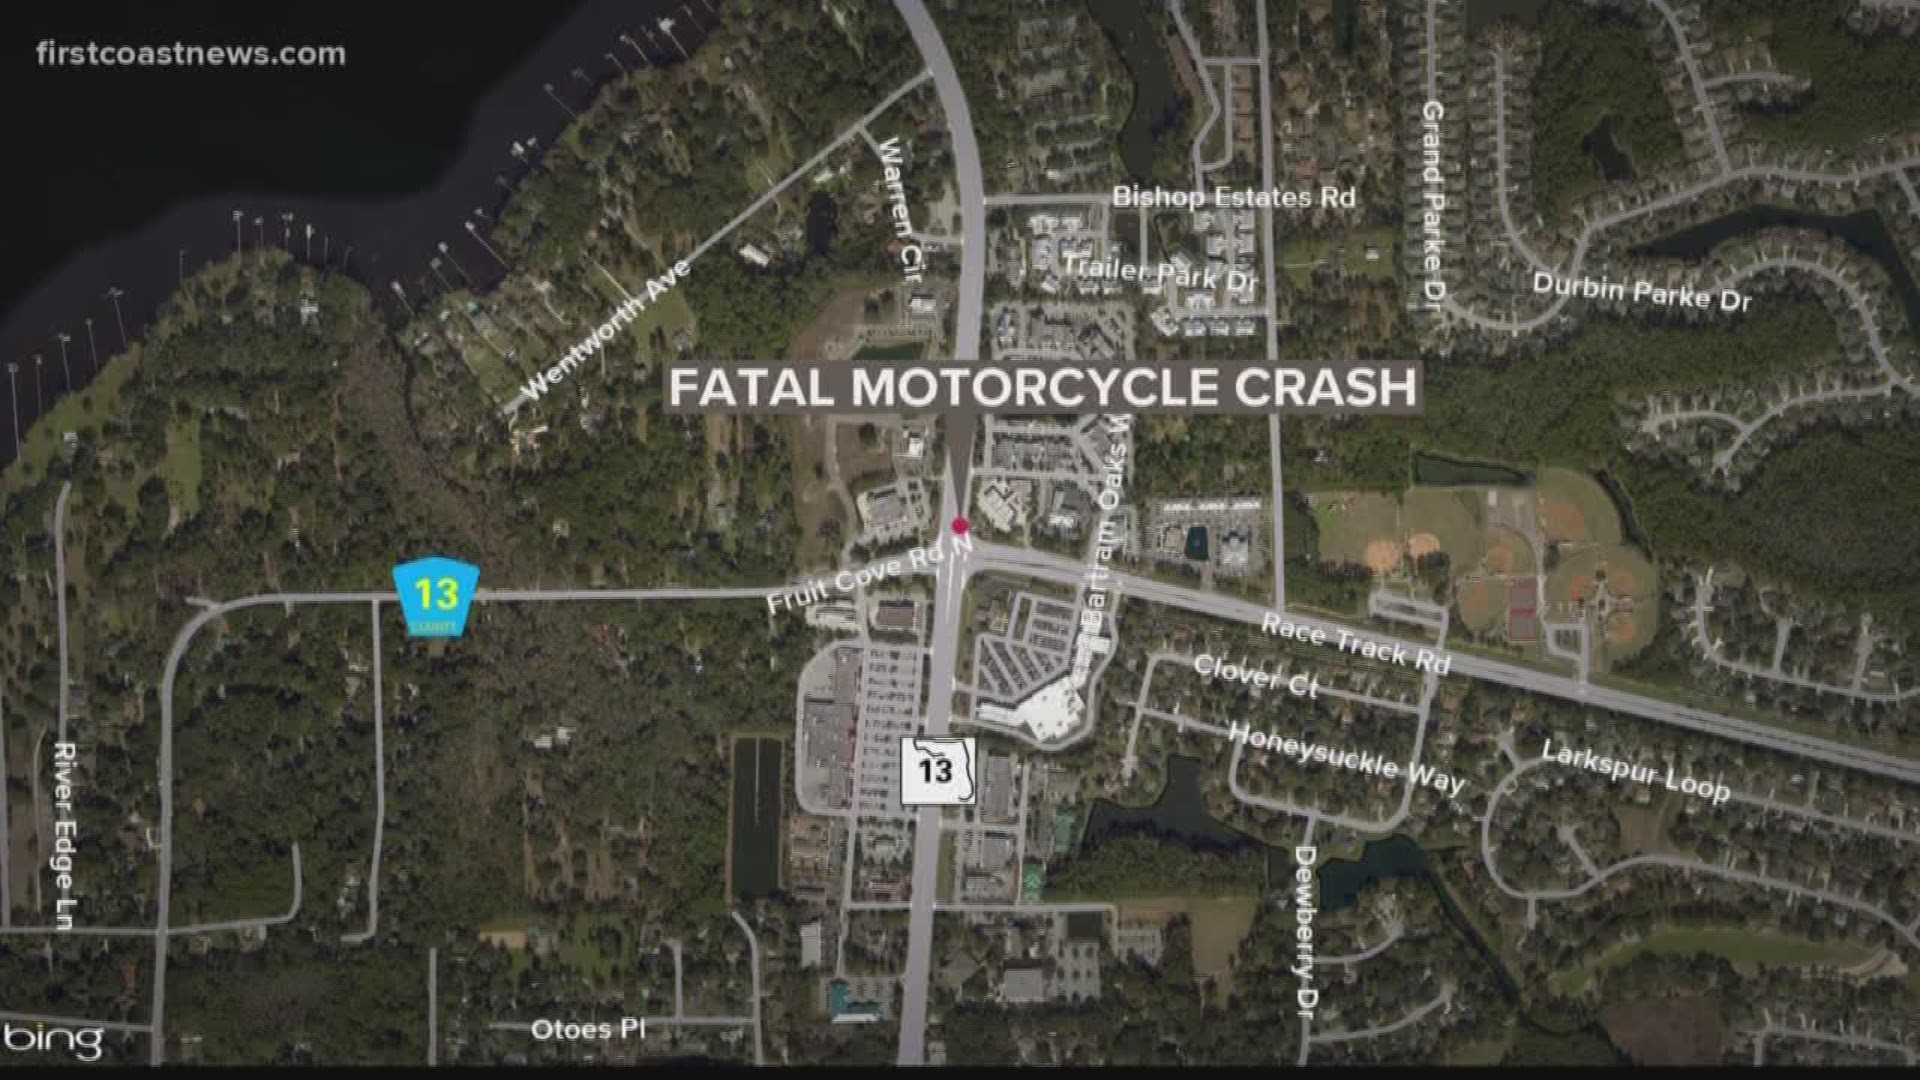 An 18-year-old motorcycle rider is dead after being ejected off his bike in St. Johns County Sunday, according to Florida Highway Patrol.